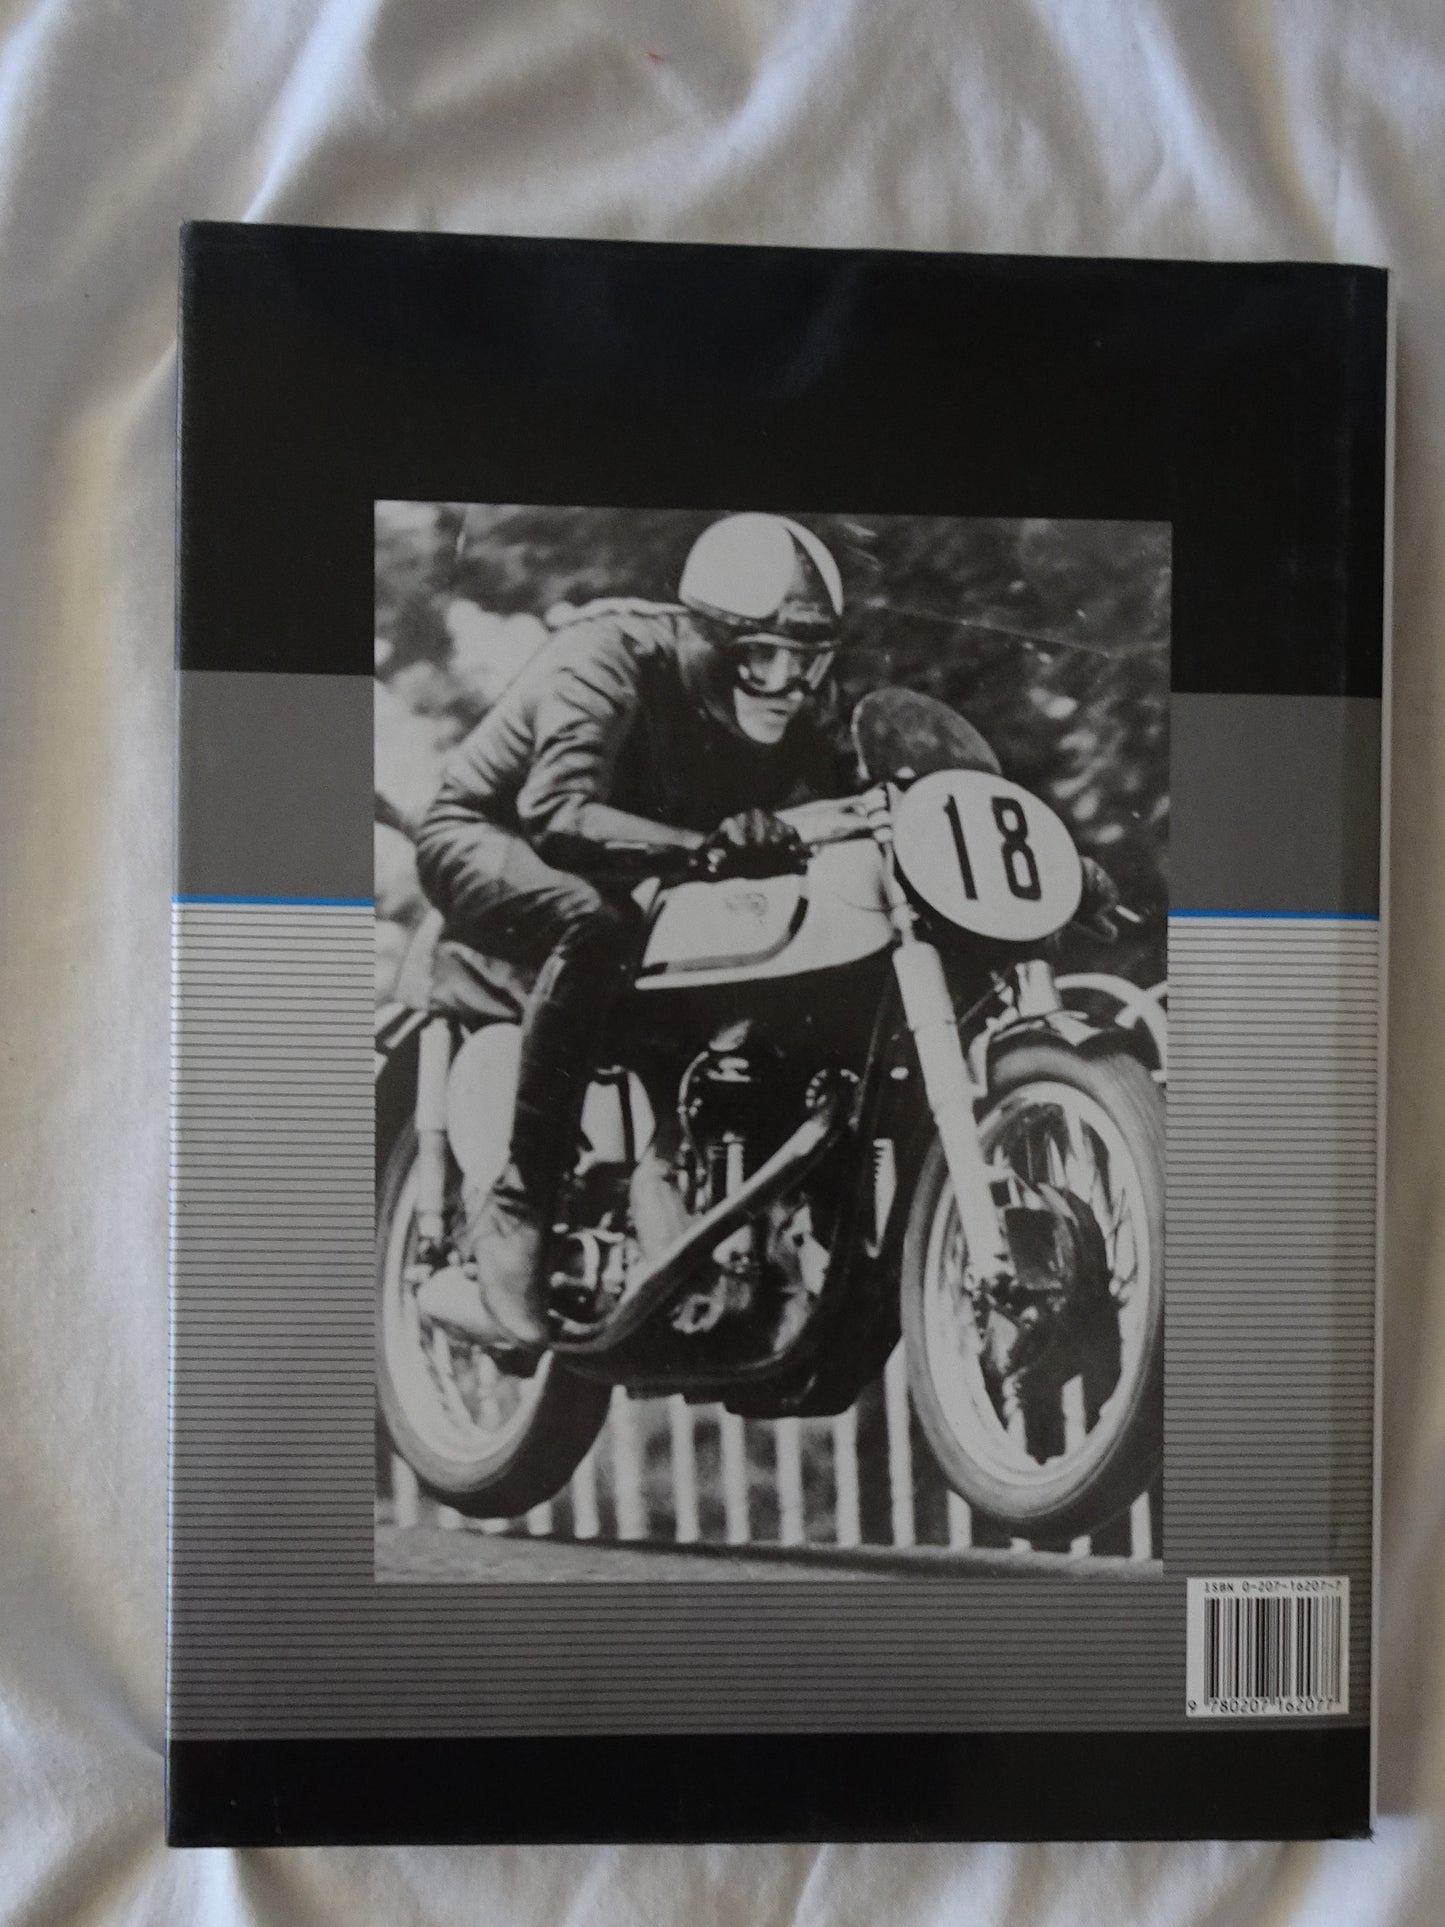 Australian Motorcycle Heroes 1949-1989 by Don Cox & Will Hagon